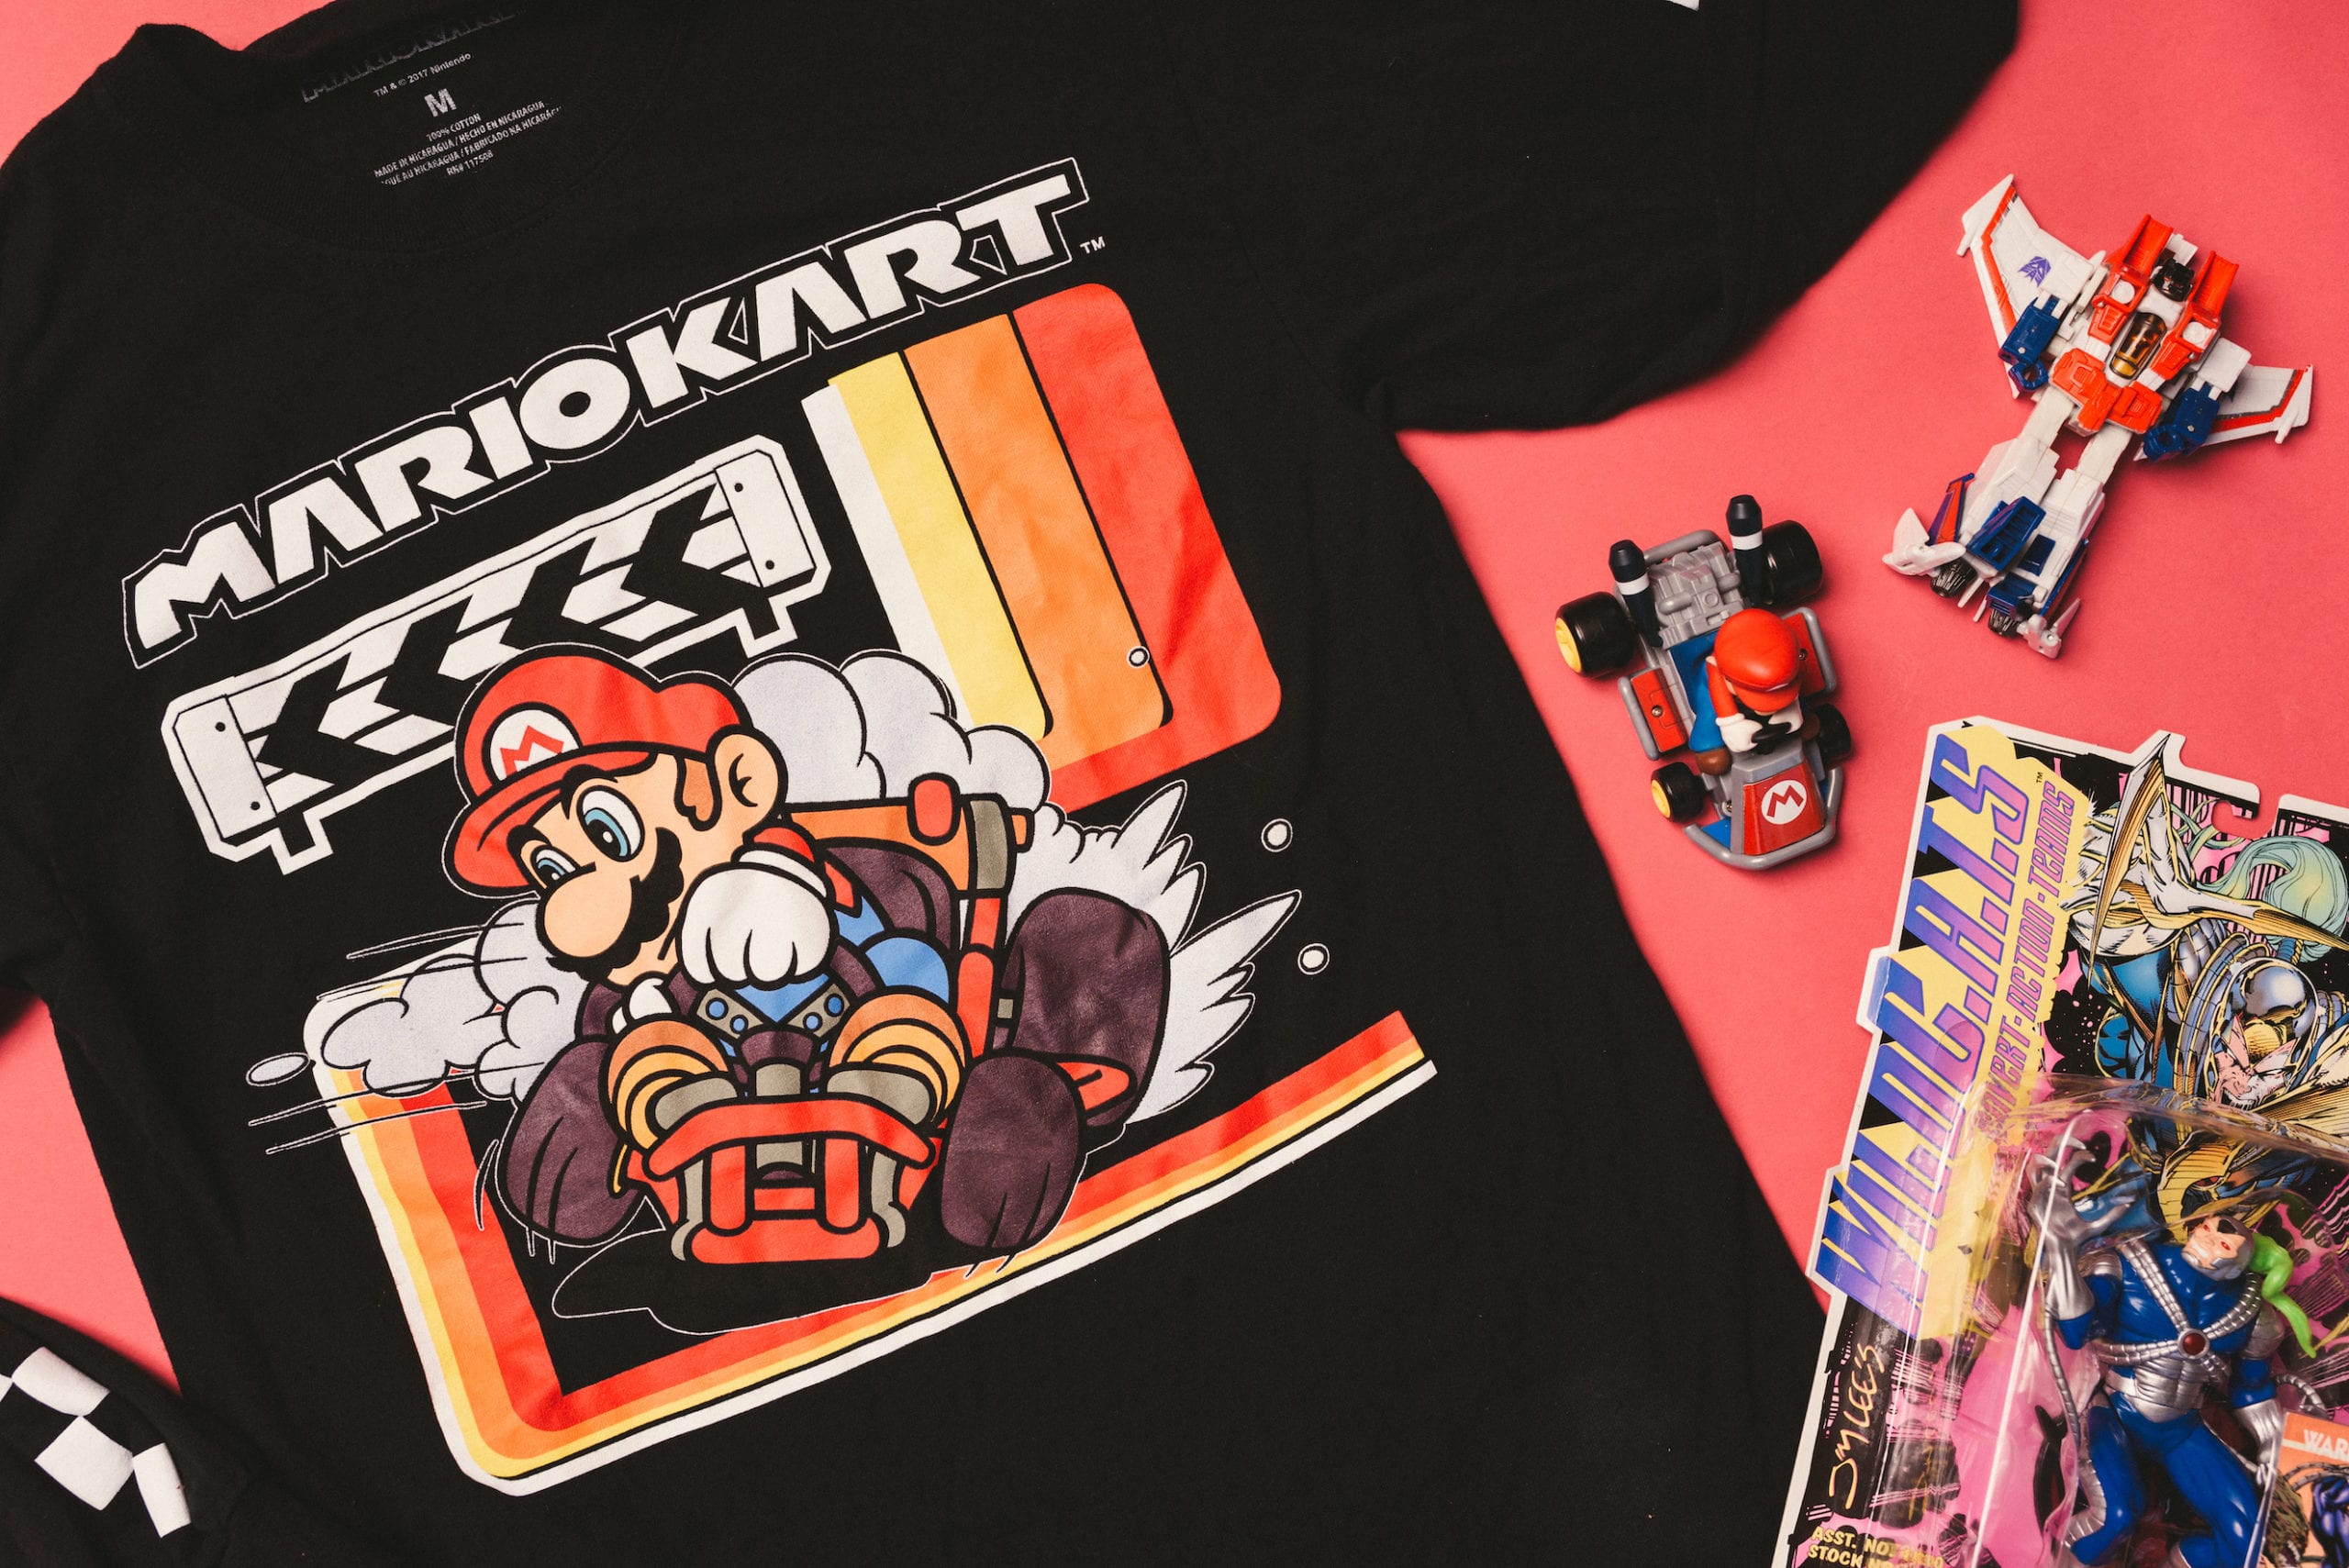 Heart Piece Plus Media Day Branding MarioKart t shirt and toy, Transformer toy, and action figure memoribilia